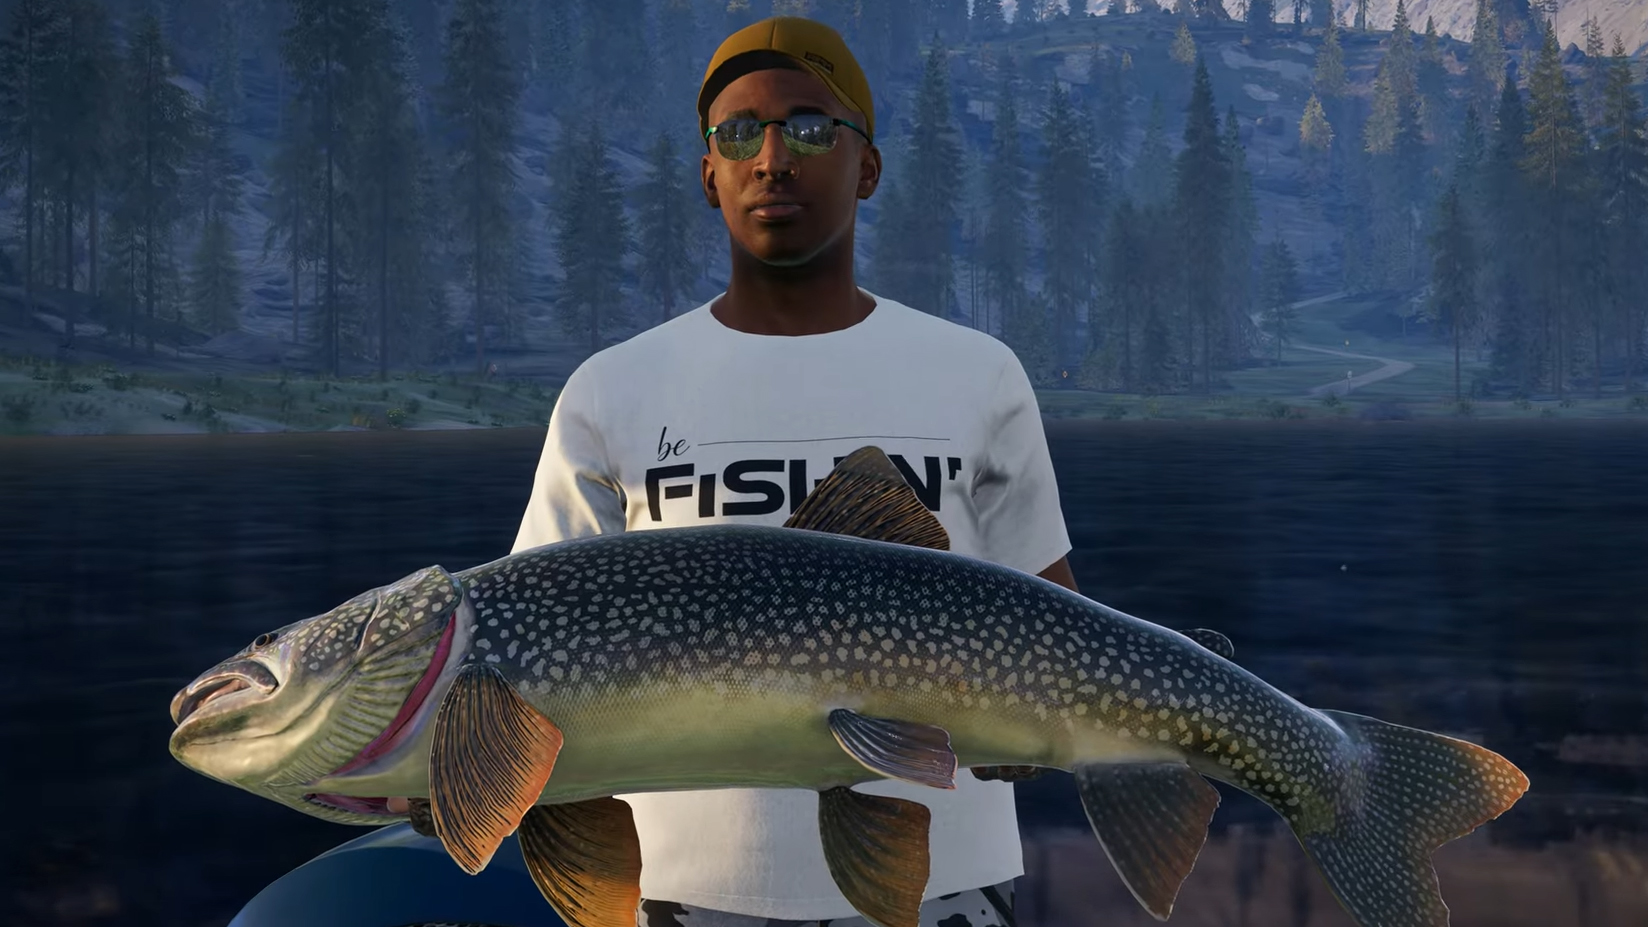 Jigging, pumping, and other fun terms I learned from this co-op fishing sim trailer